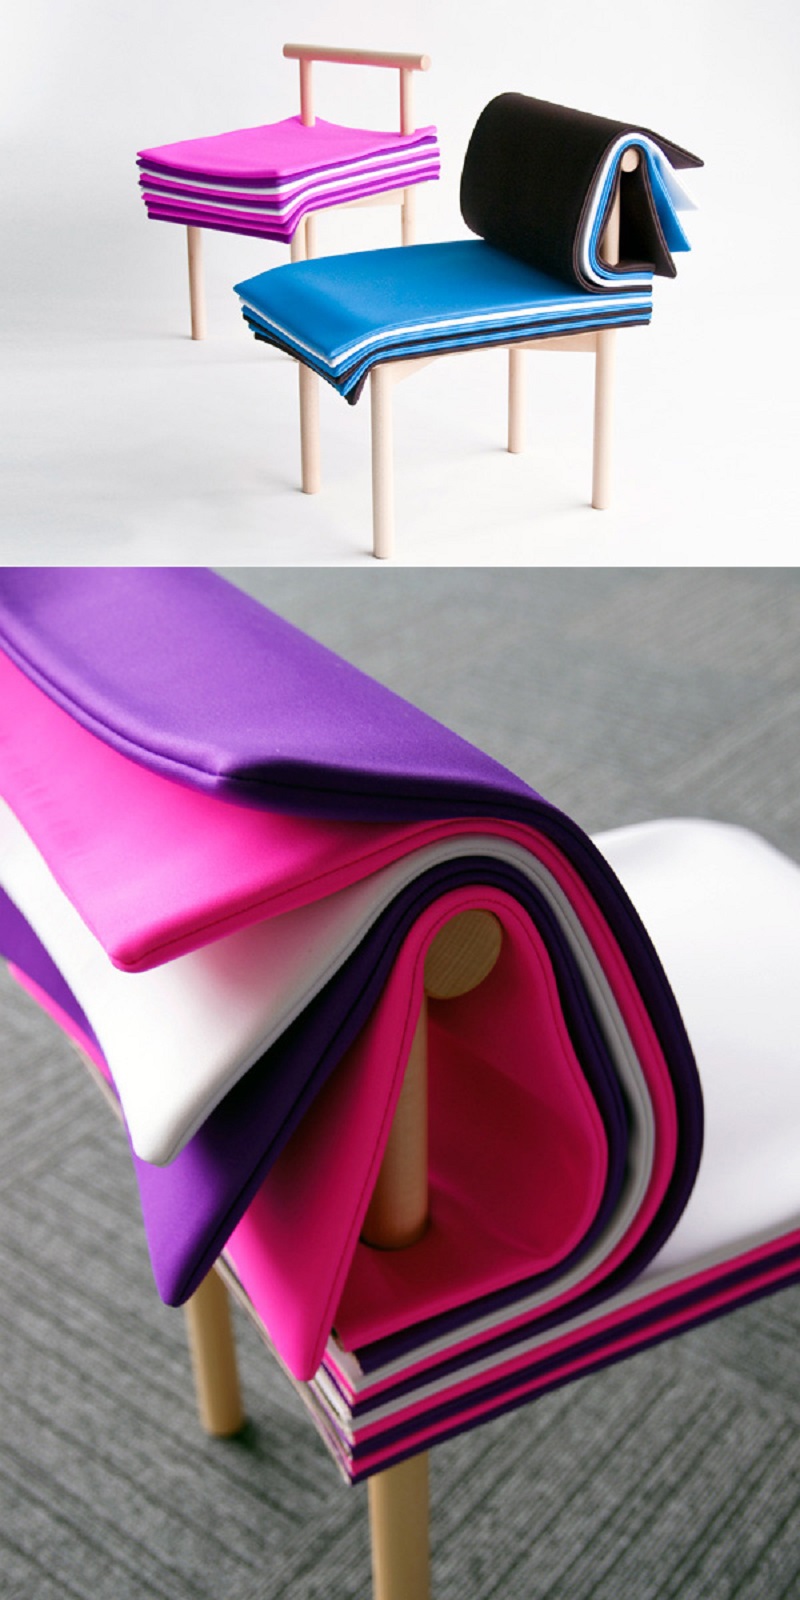 A Chair That Consists Of "Pages."